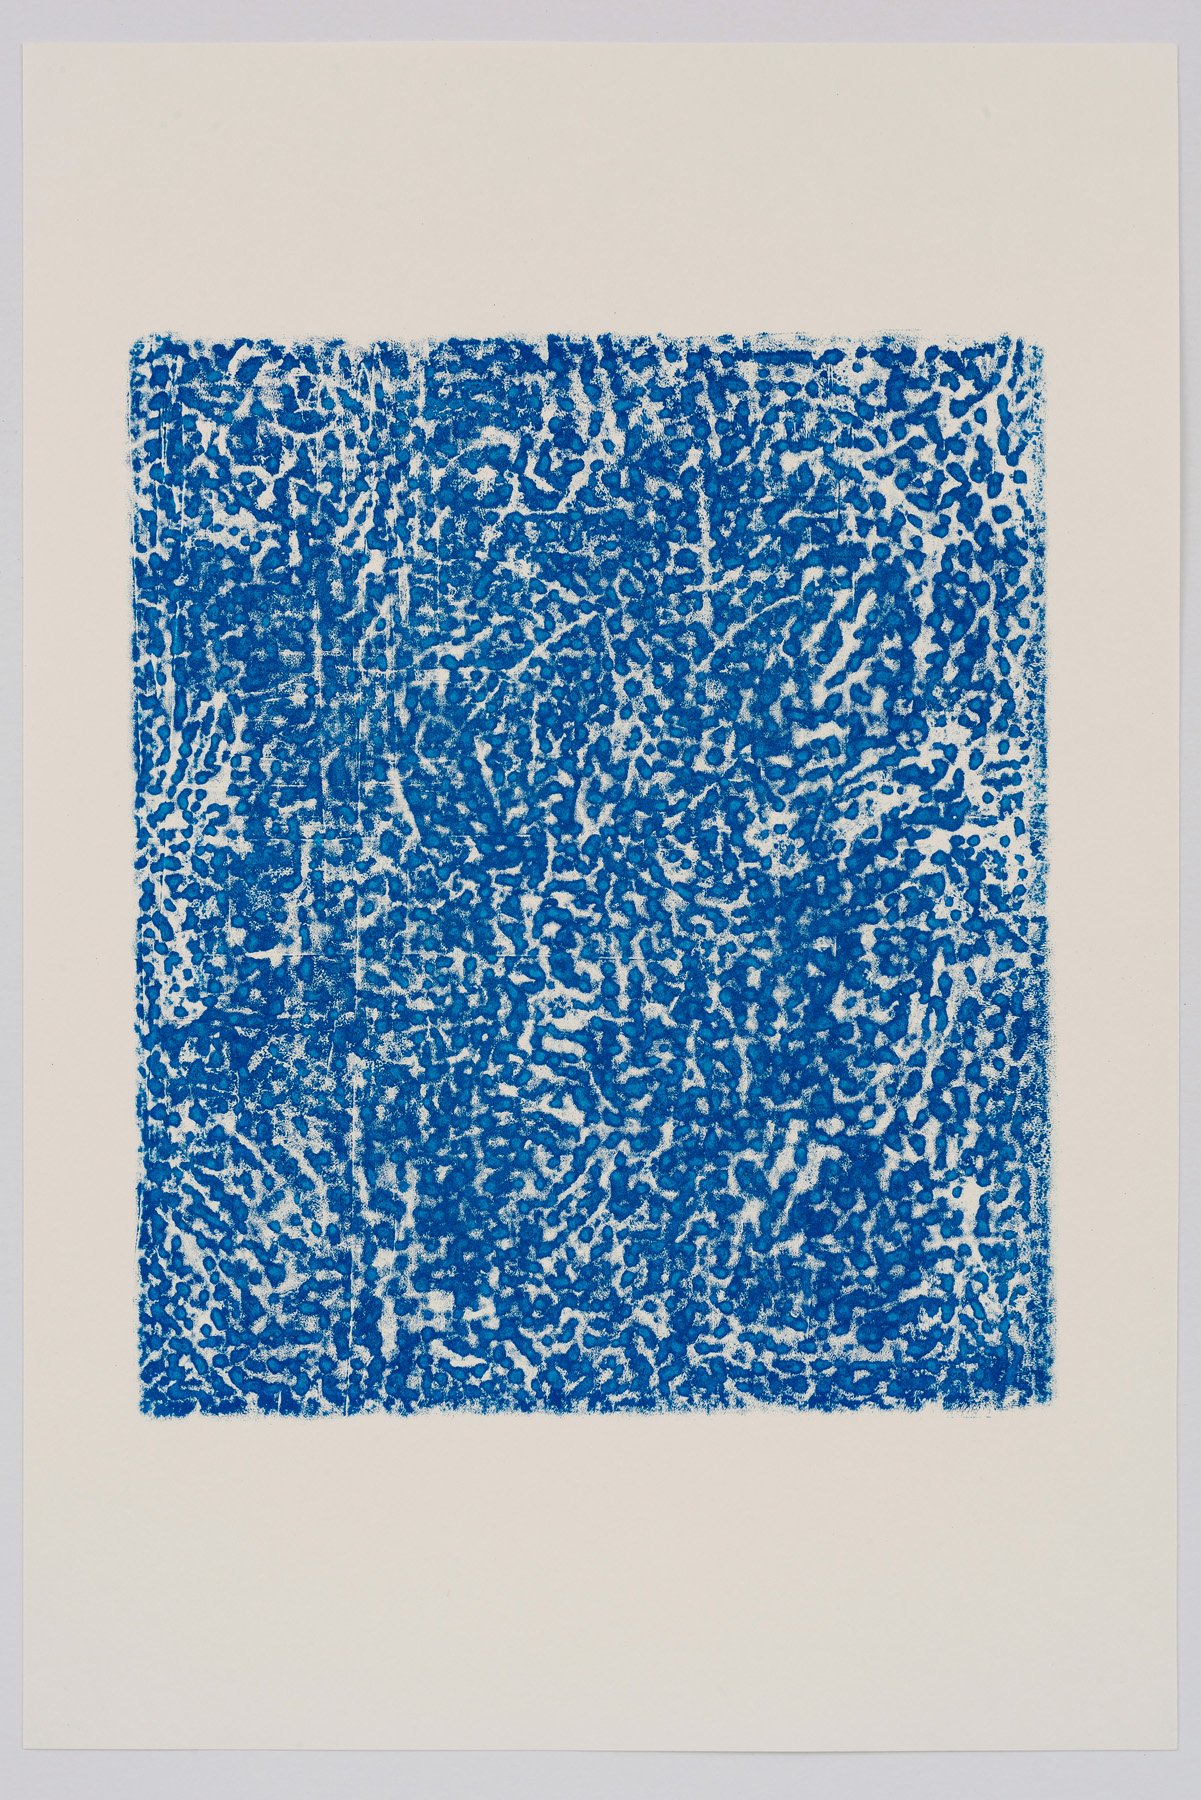  Untitled (Blue Series) V   2022   Oil on hot pressed Saunders Waterford paper   Paper size: 51 x 34 cm, Print size: 32 x 28 cm   Monoprint (one of one)  